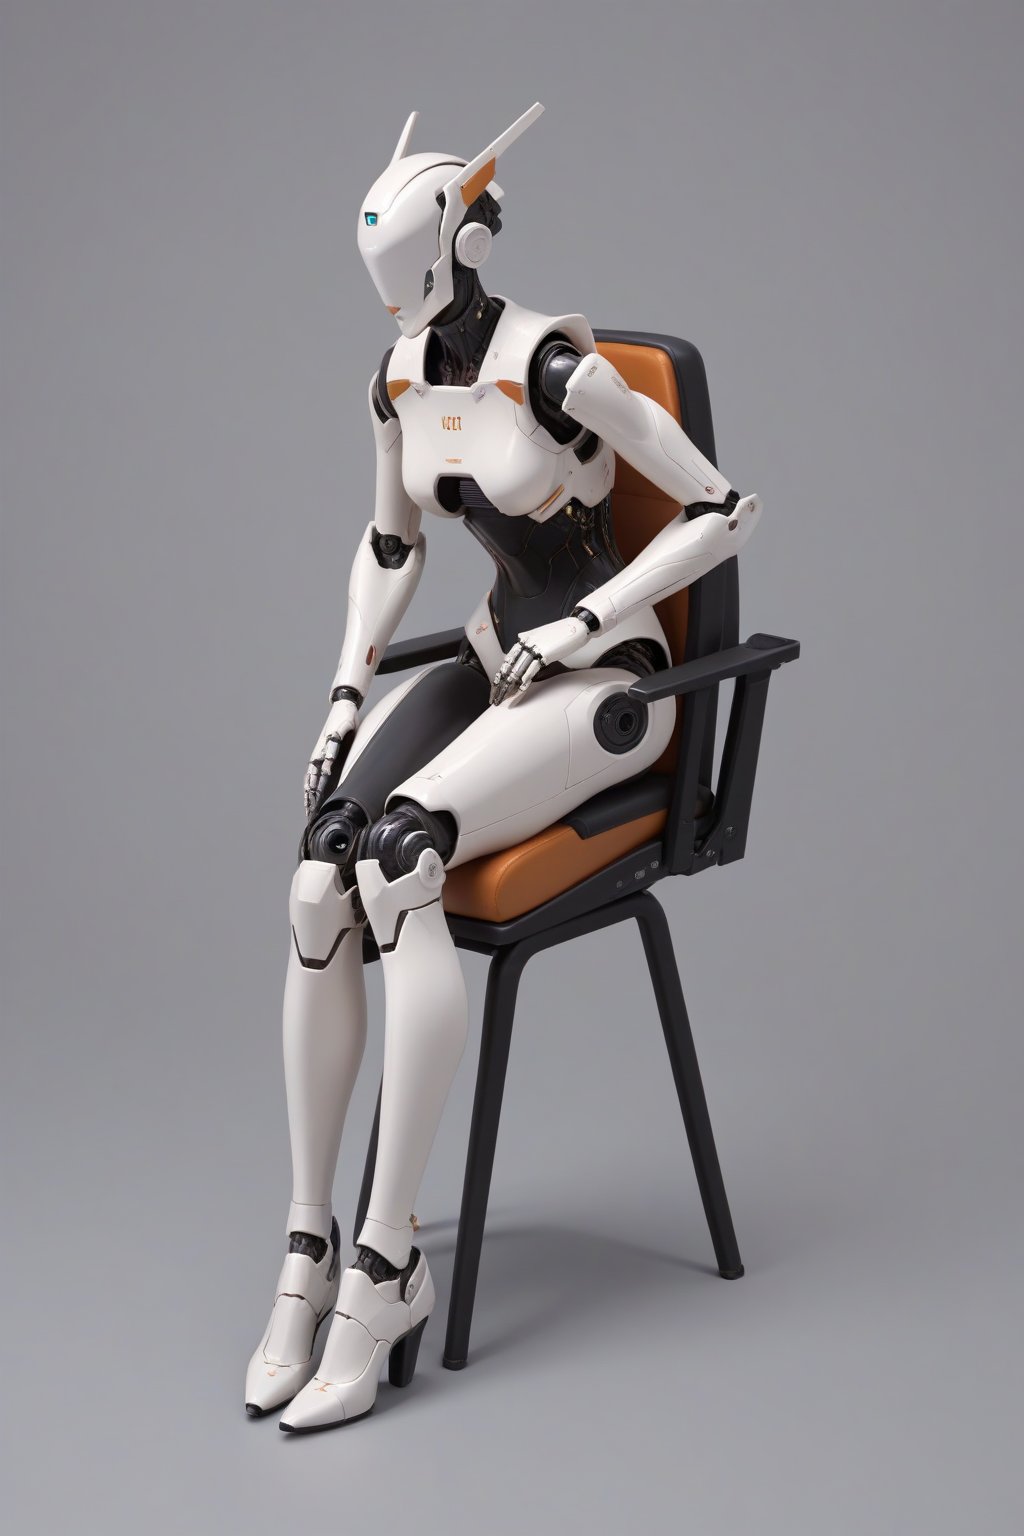 score_9, score_8_up, score_7_up, score_6_up, score_5_up, score_4_up, source_3D, 1girl, figurine, joints, robot joints, mechanical parts, mechanical legs, Sitting, Mechanical seat, large mechanical equipment background, 